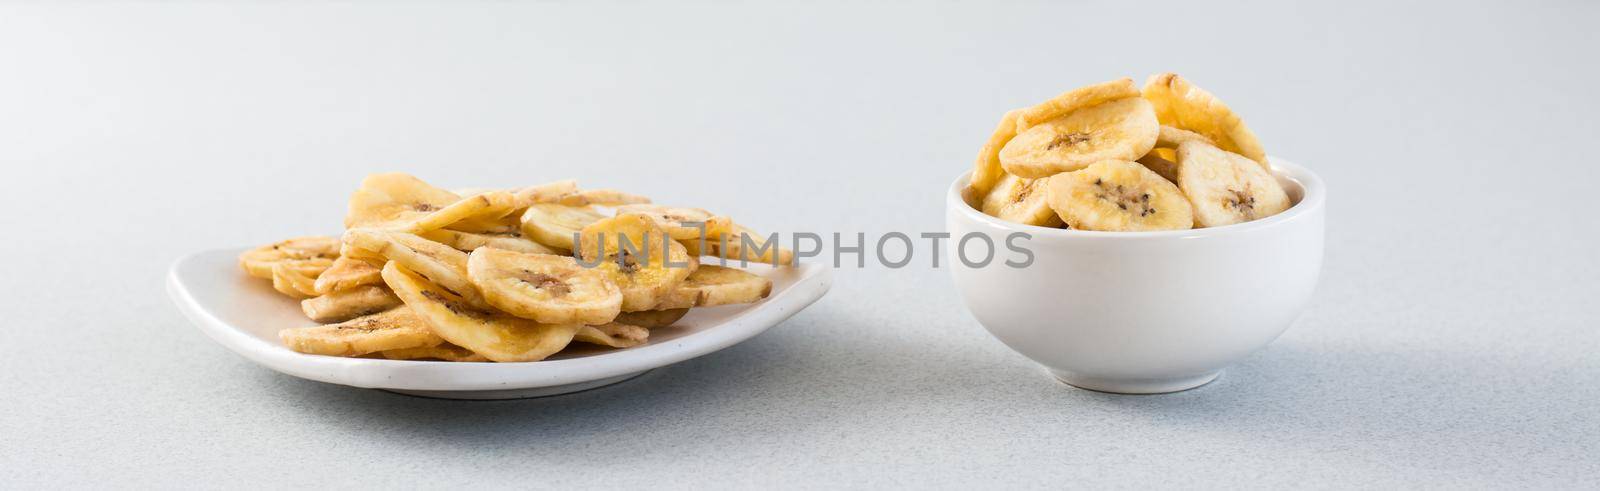 Baked banana chips in a white bowl and saucer on the table. Fast food. Web banner by Aleruana